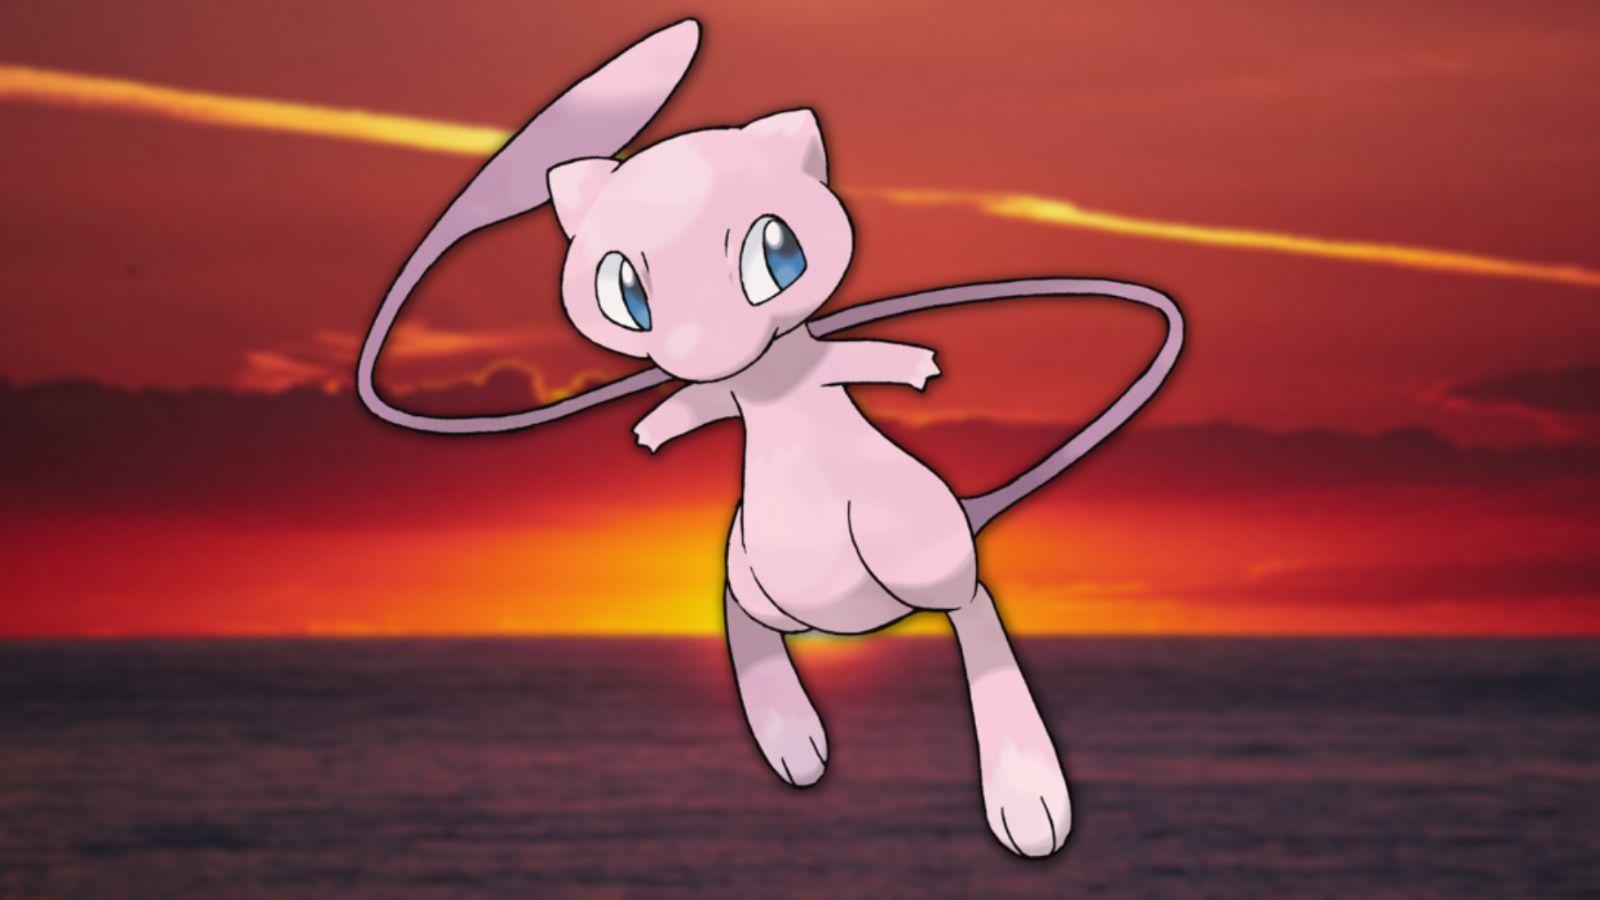 Pokemon TCG fans love this “next level” Mew card with rising sun effect -  Dexerto